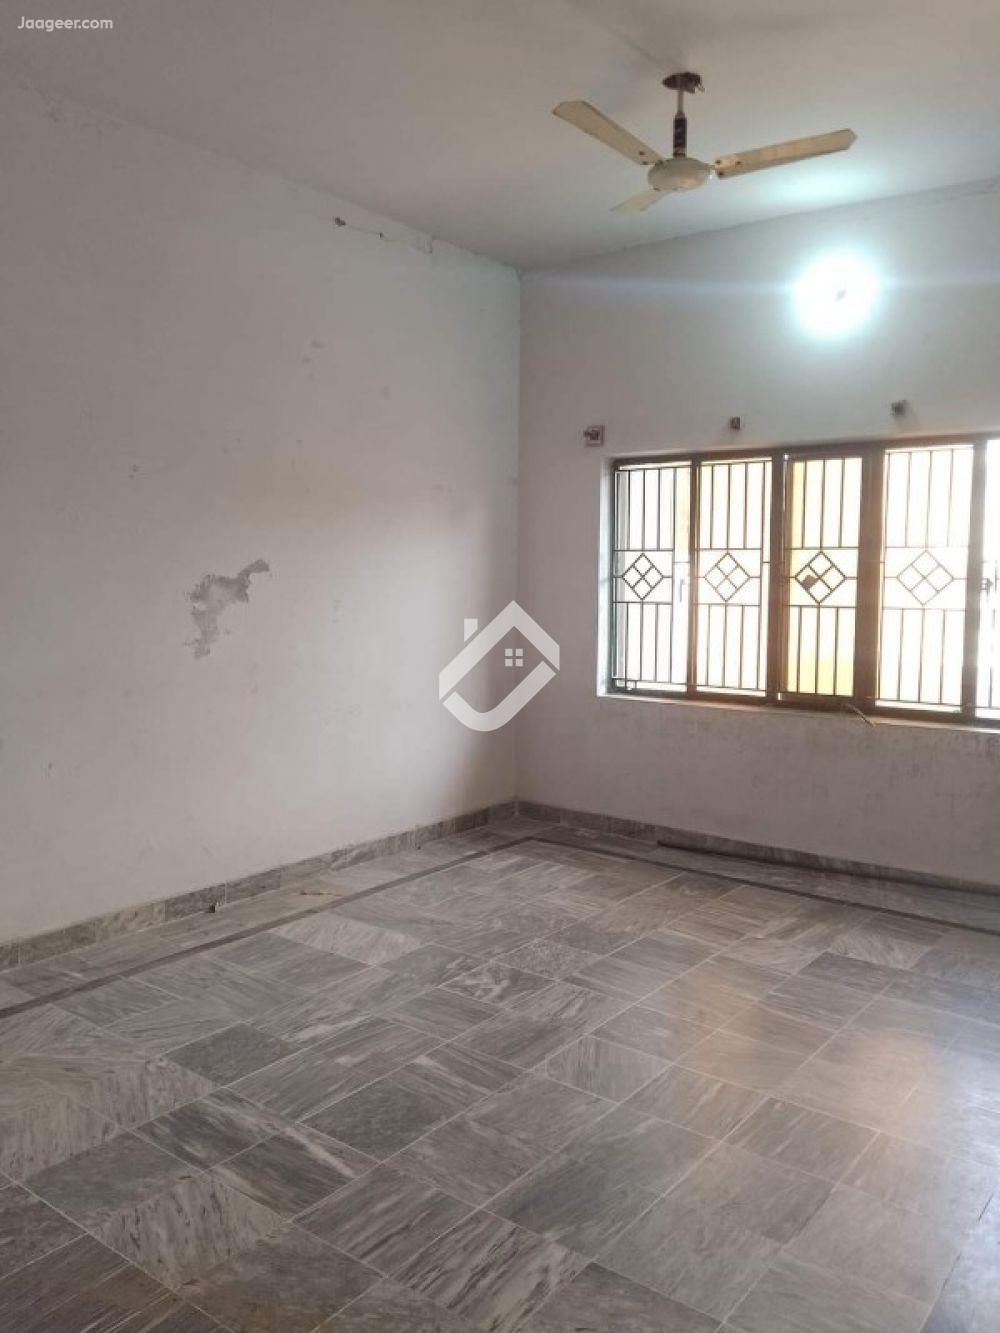 View  9 Marla Upper Portion House For Rent In Shah Khalid Colony in Shah Khalid Colony, Rawalpindi